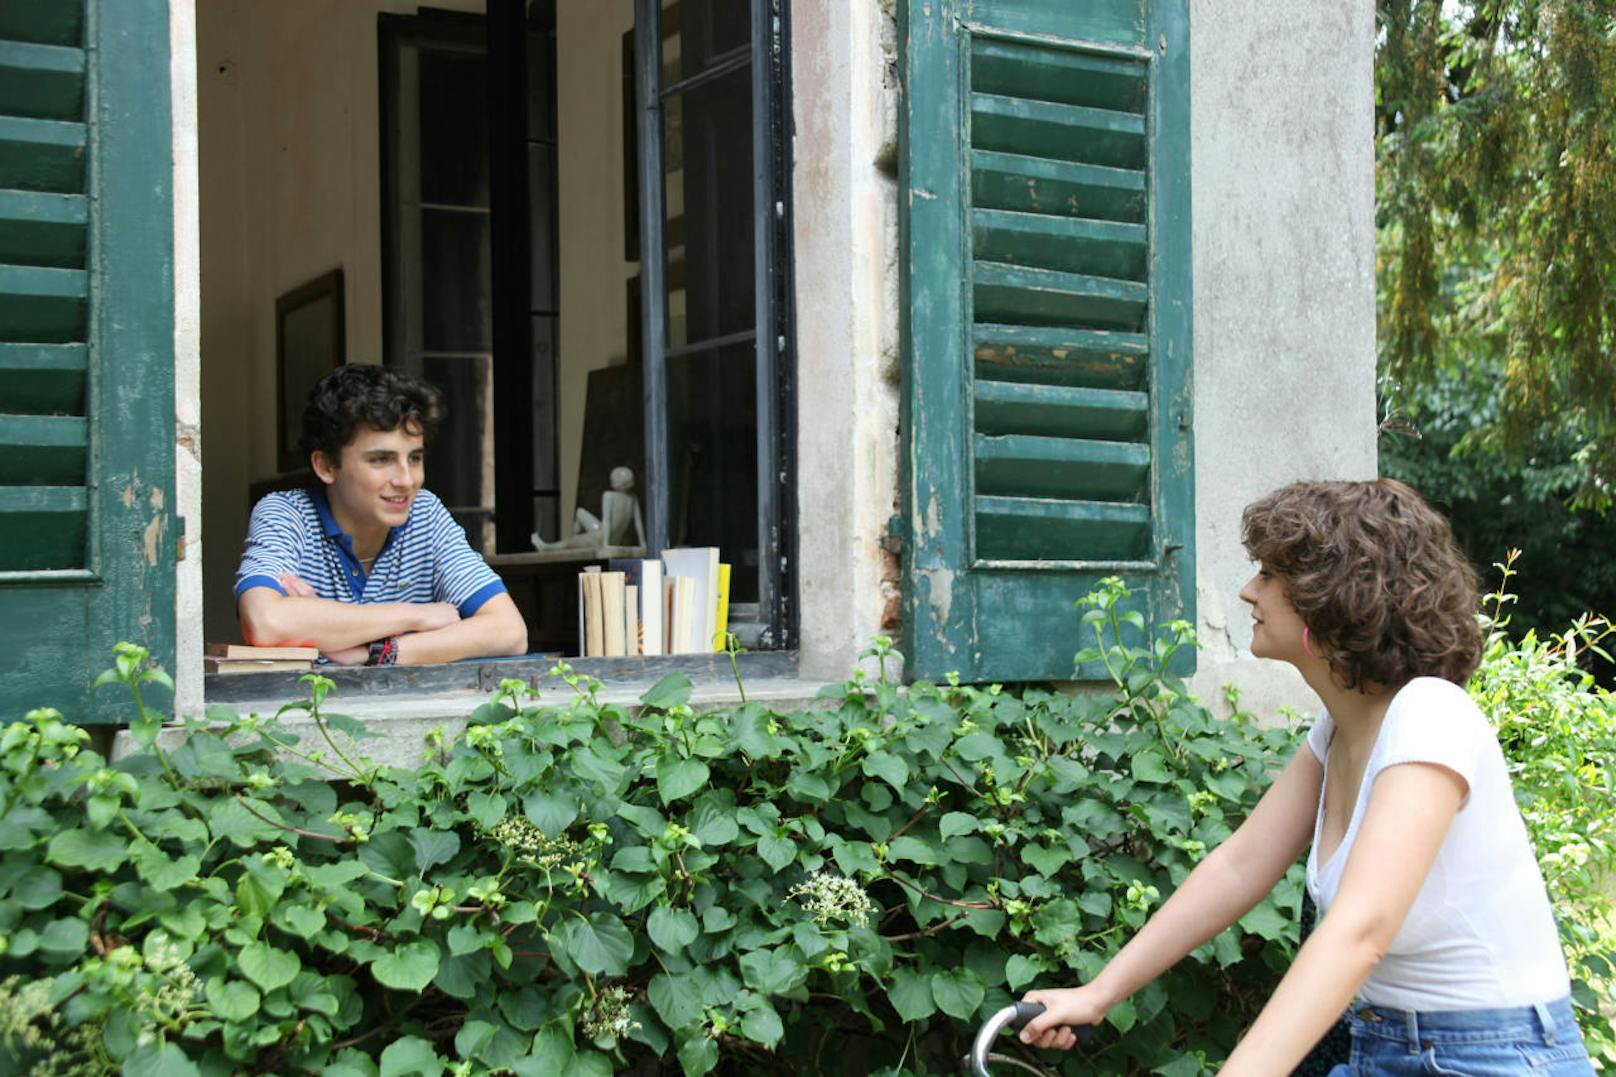 29.1. "Call Me By Your Name". Mit Timothée Chalamet und Armie Hammer.